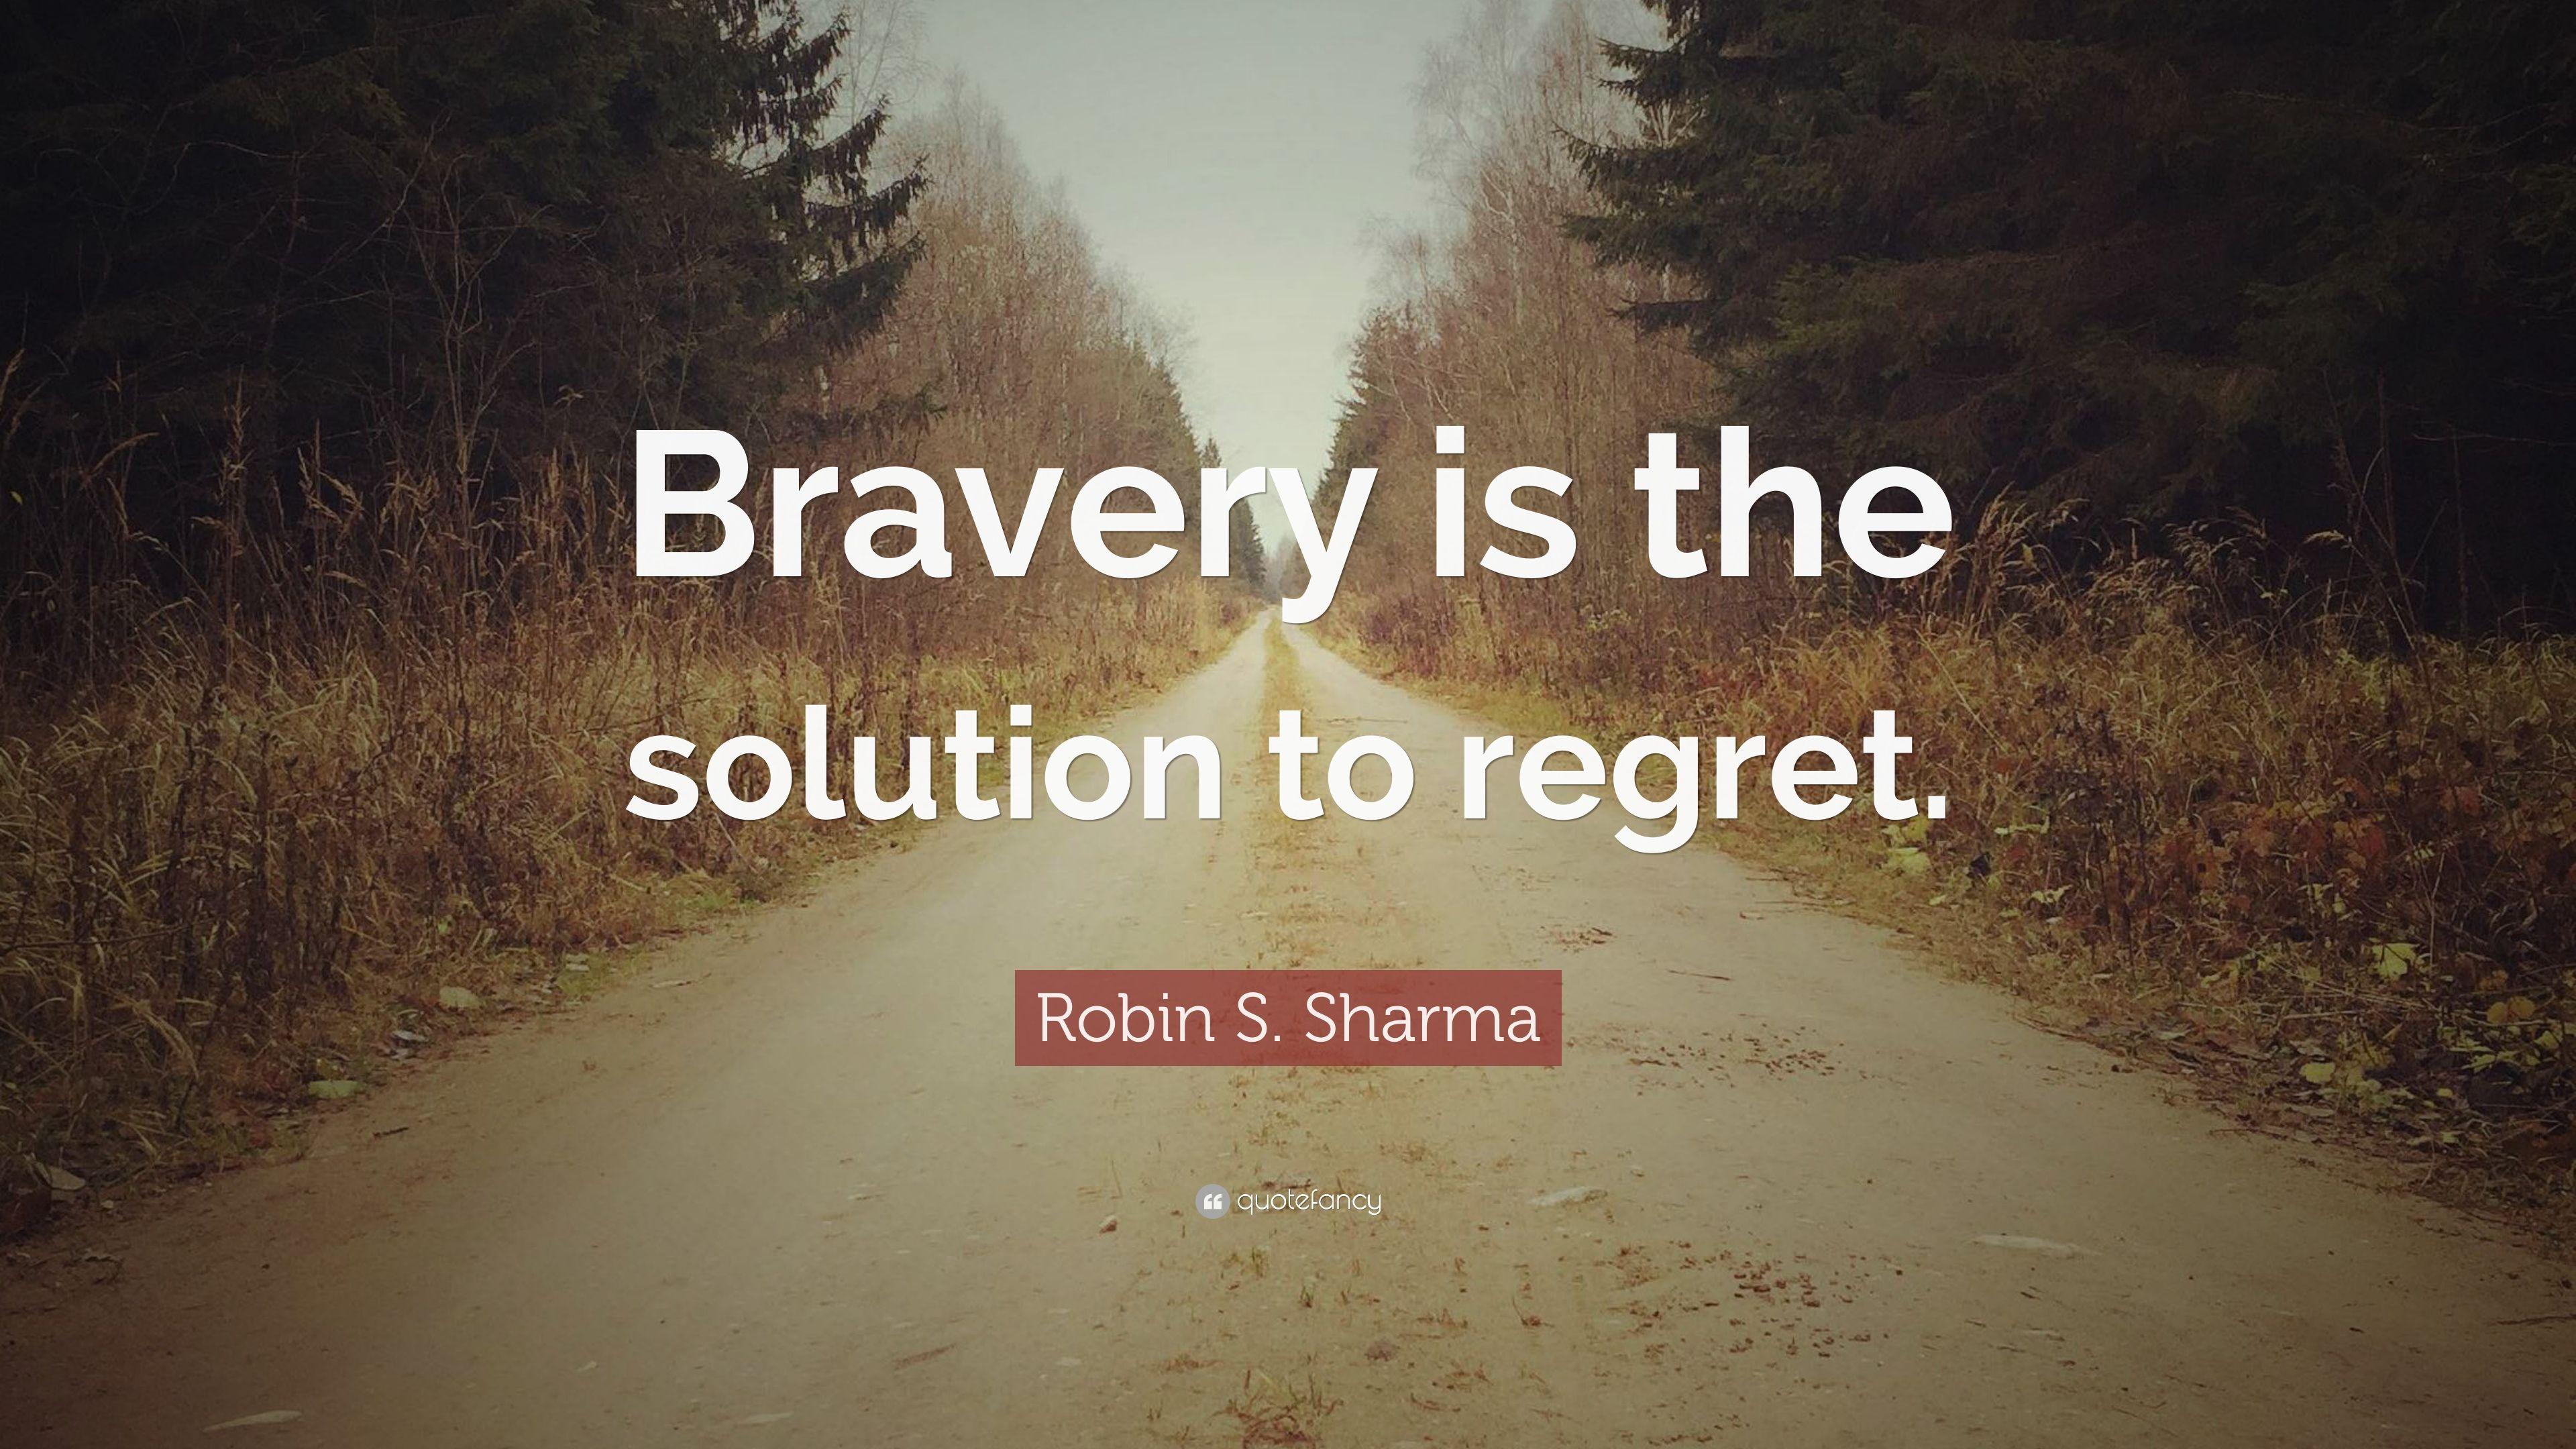 Robin S. Sharma Quote: “Bravery is the solution to regret.” 12